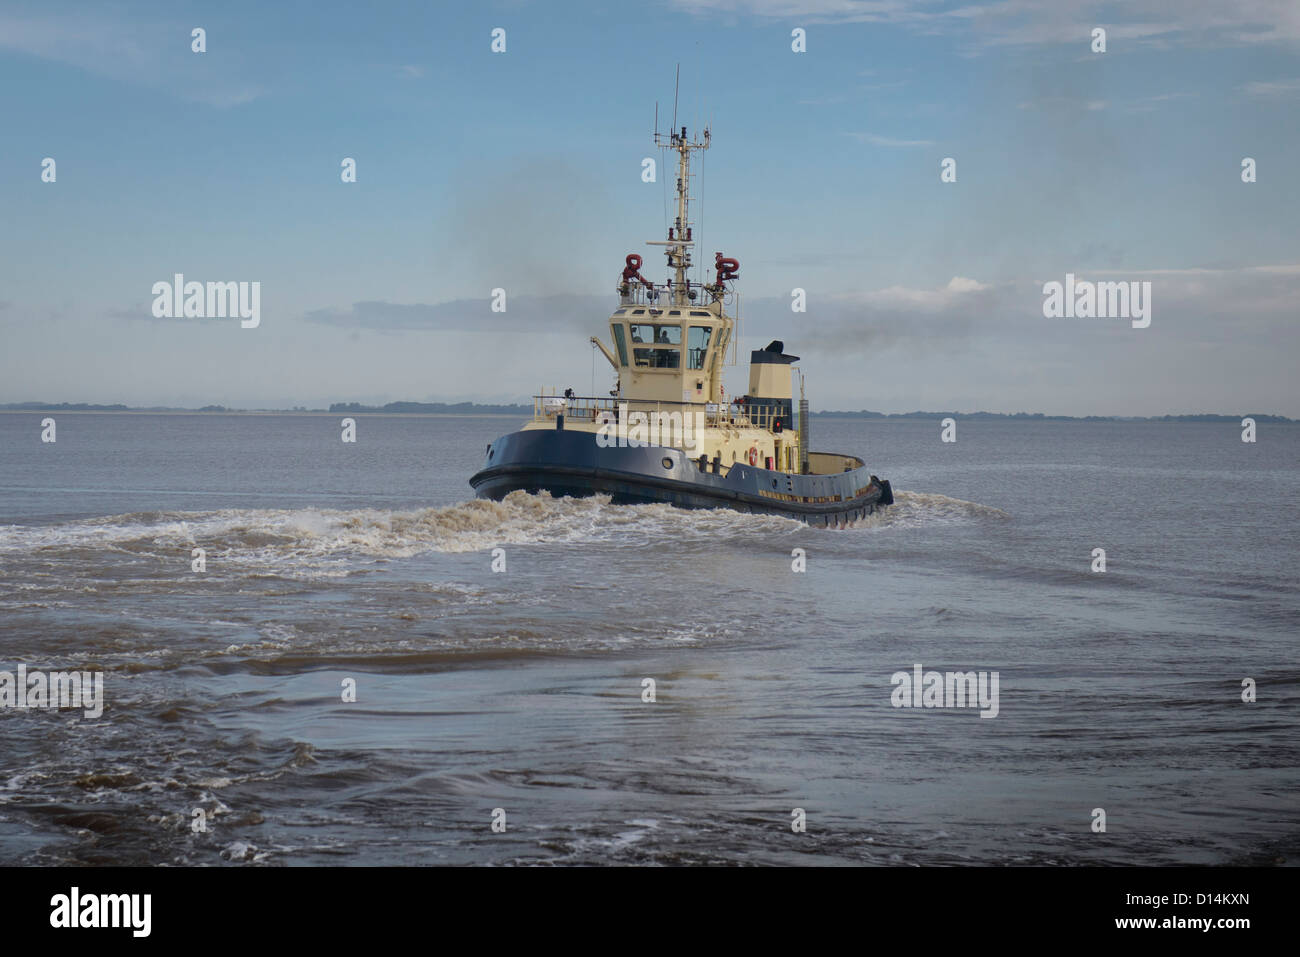 Tugboat sailing in water Stock Photo